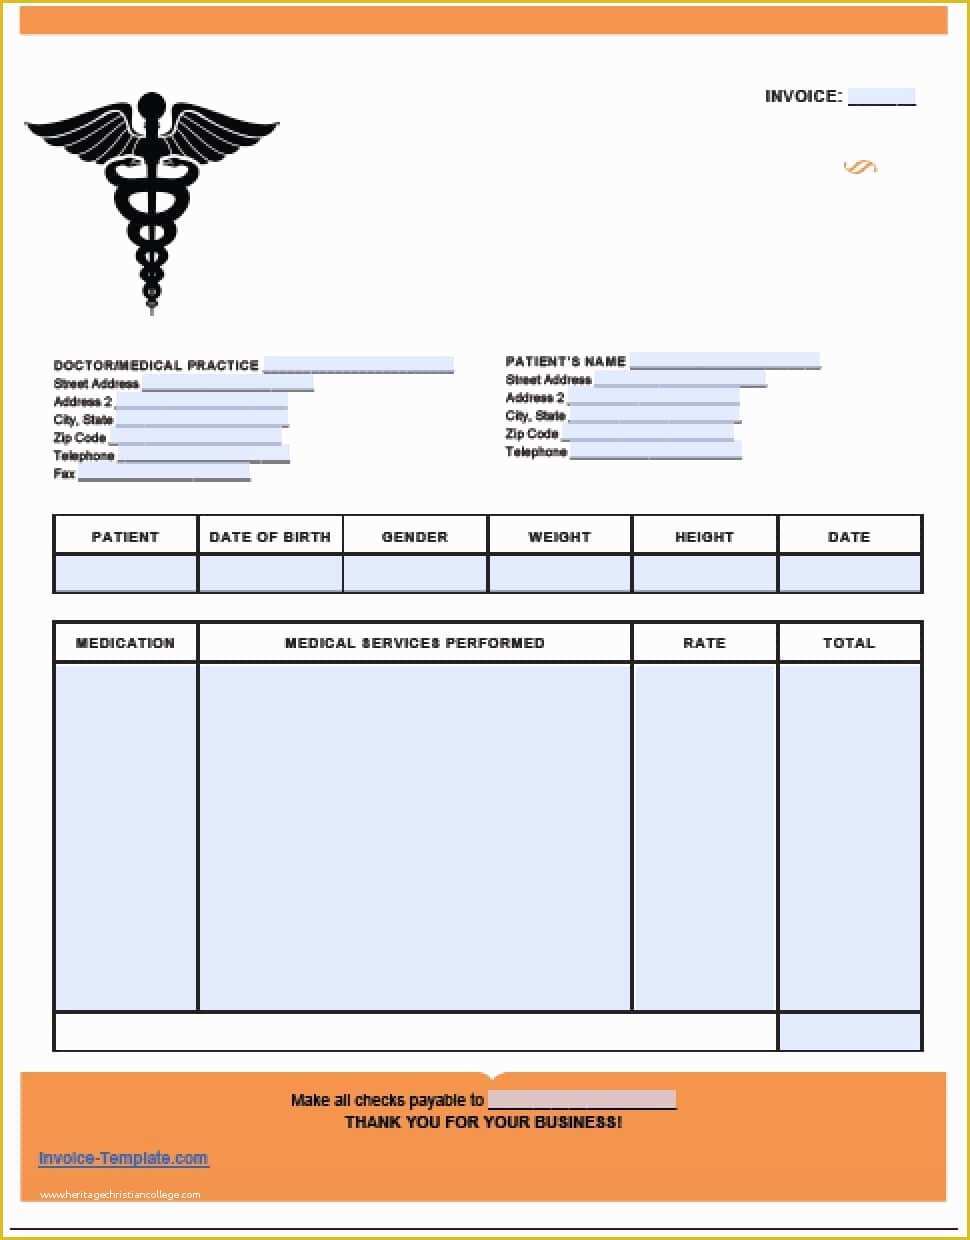 Free Medical Invoice Template Of Free Medical Invoice Template Excel Pdf